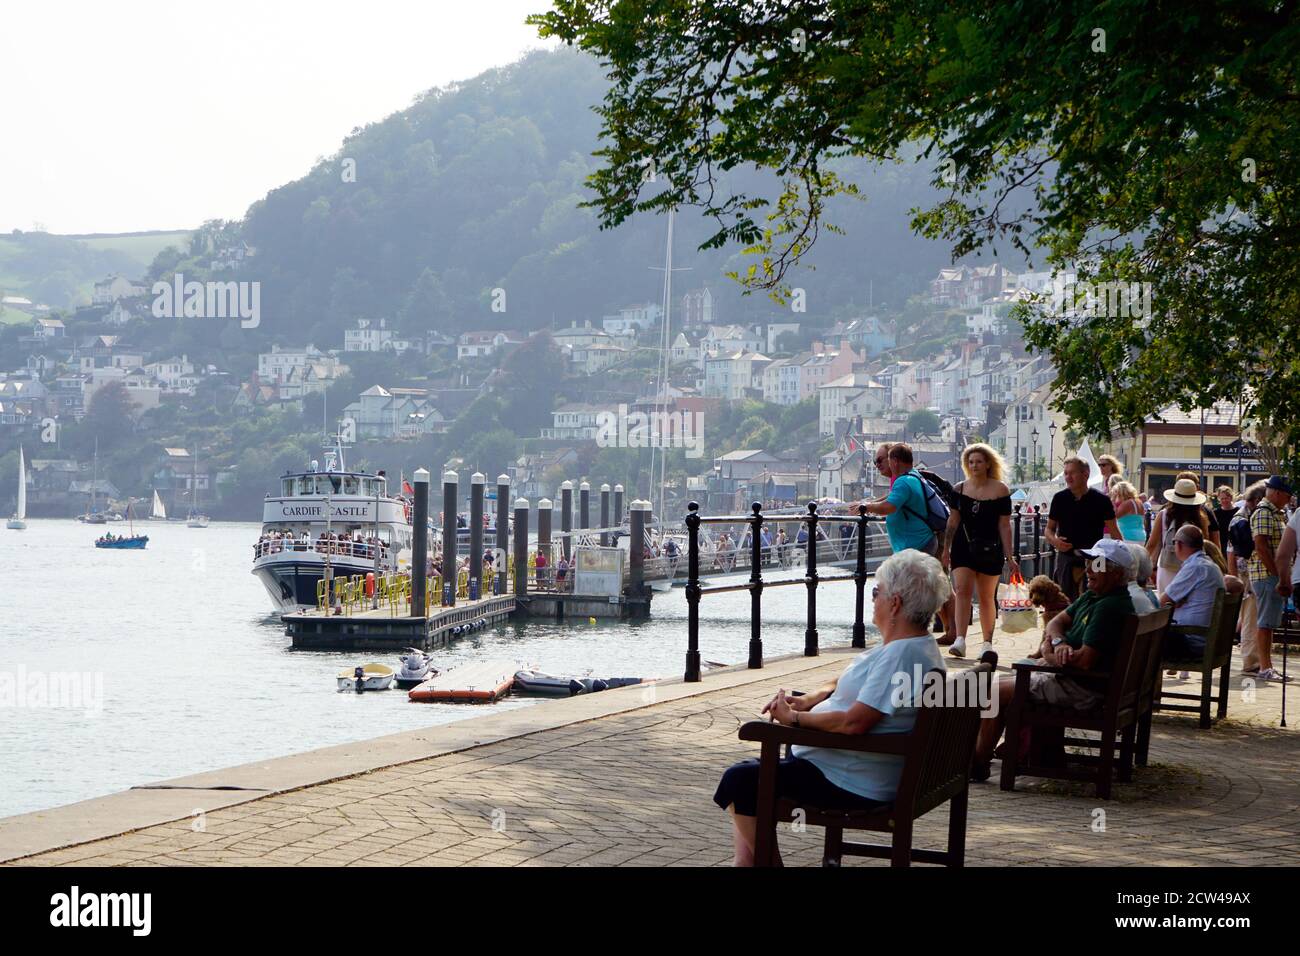 Dartmouth, Devon, UK. September 16, 2020. Tourists and holidaymakers boarding the ferry to Kingswear from Dartmouth ferry pontoon in Devon, UK. Stock Photo